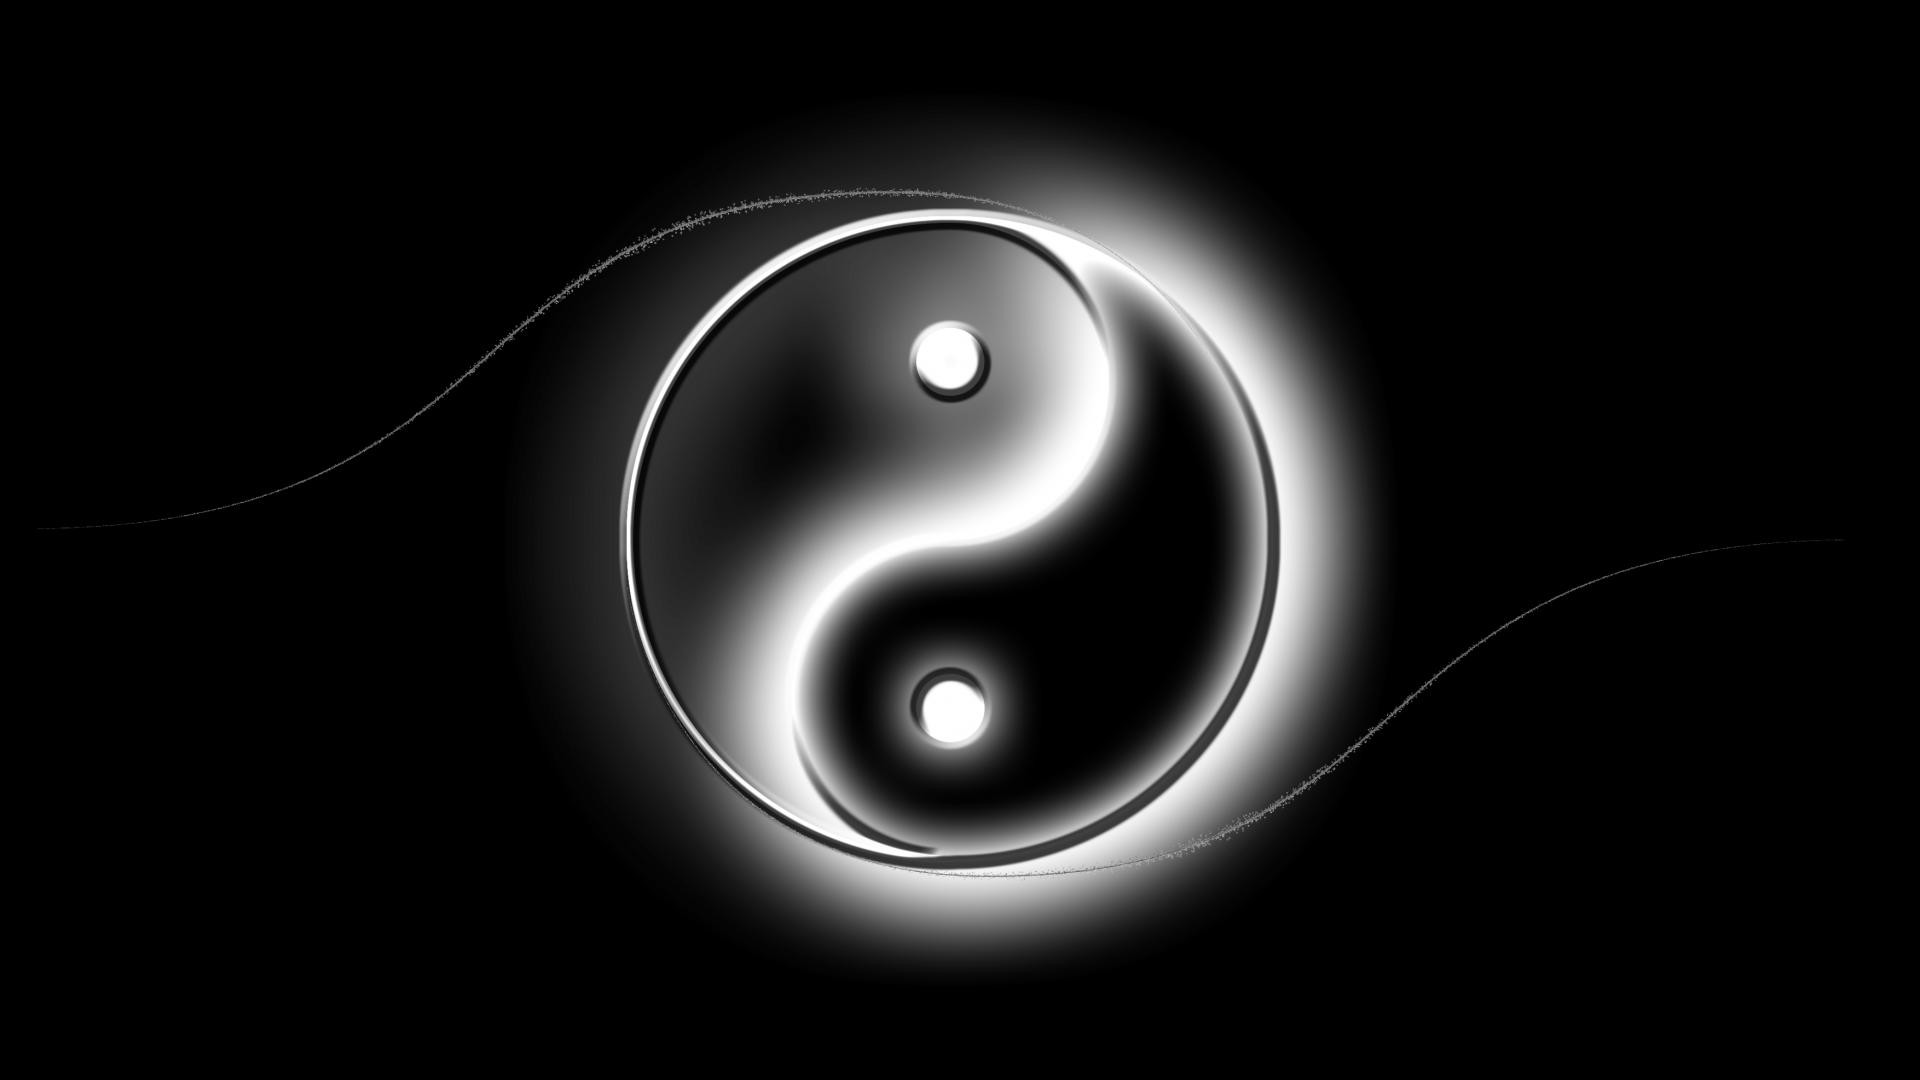 1920x1080 ... black and white ying yang wallpaper by hd wallpapers daily ...